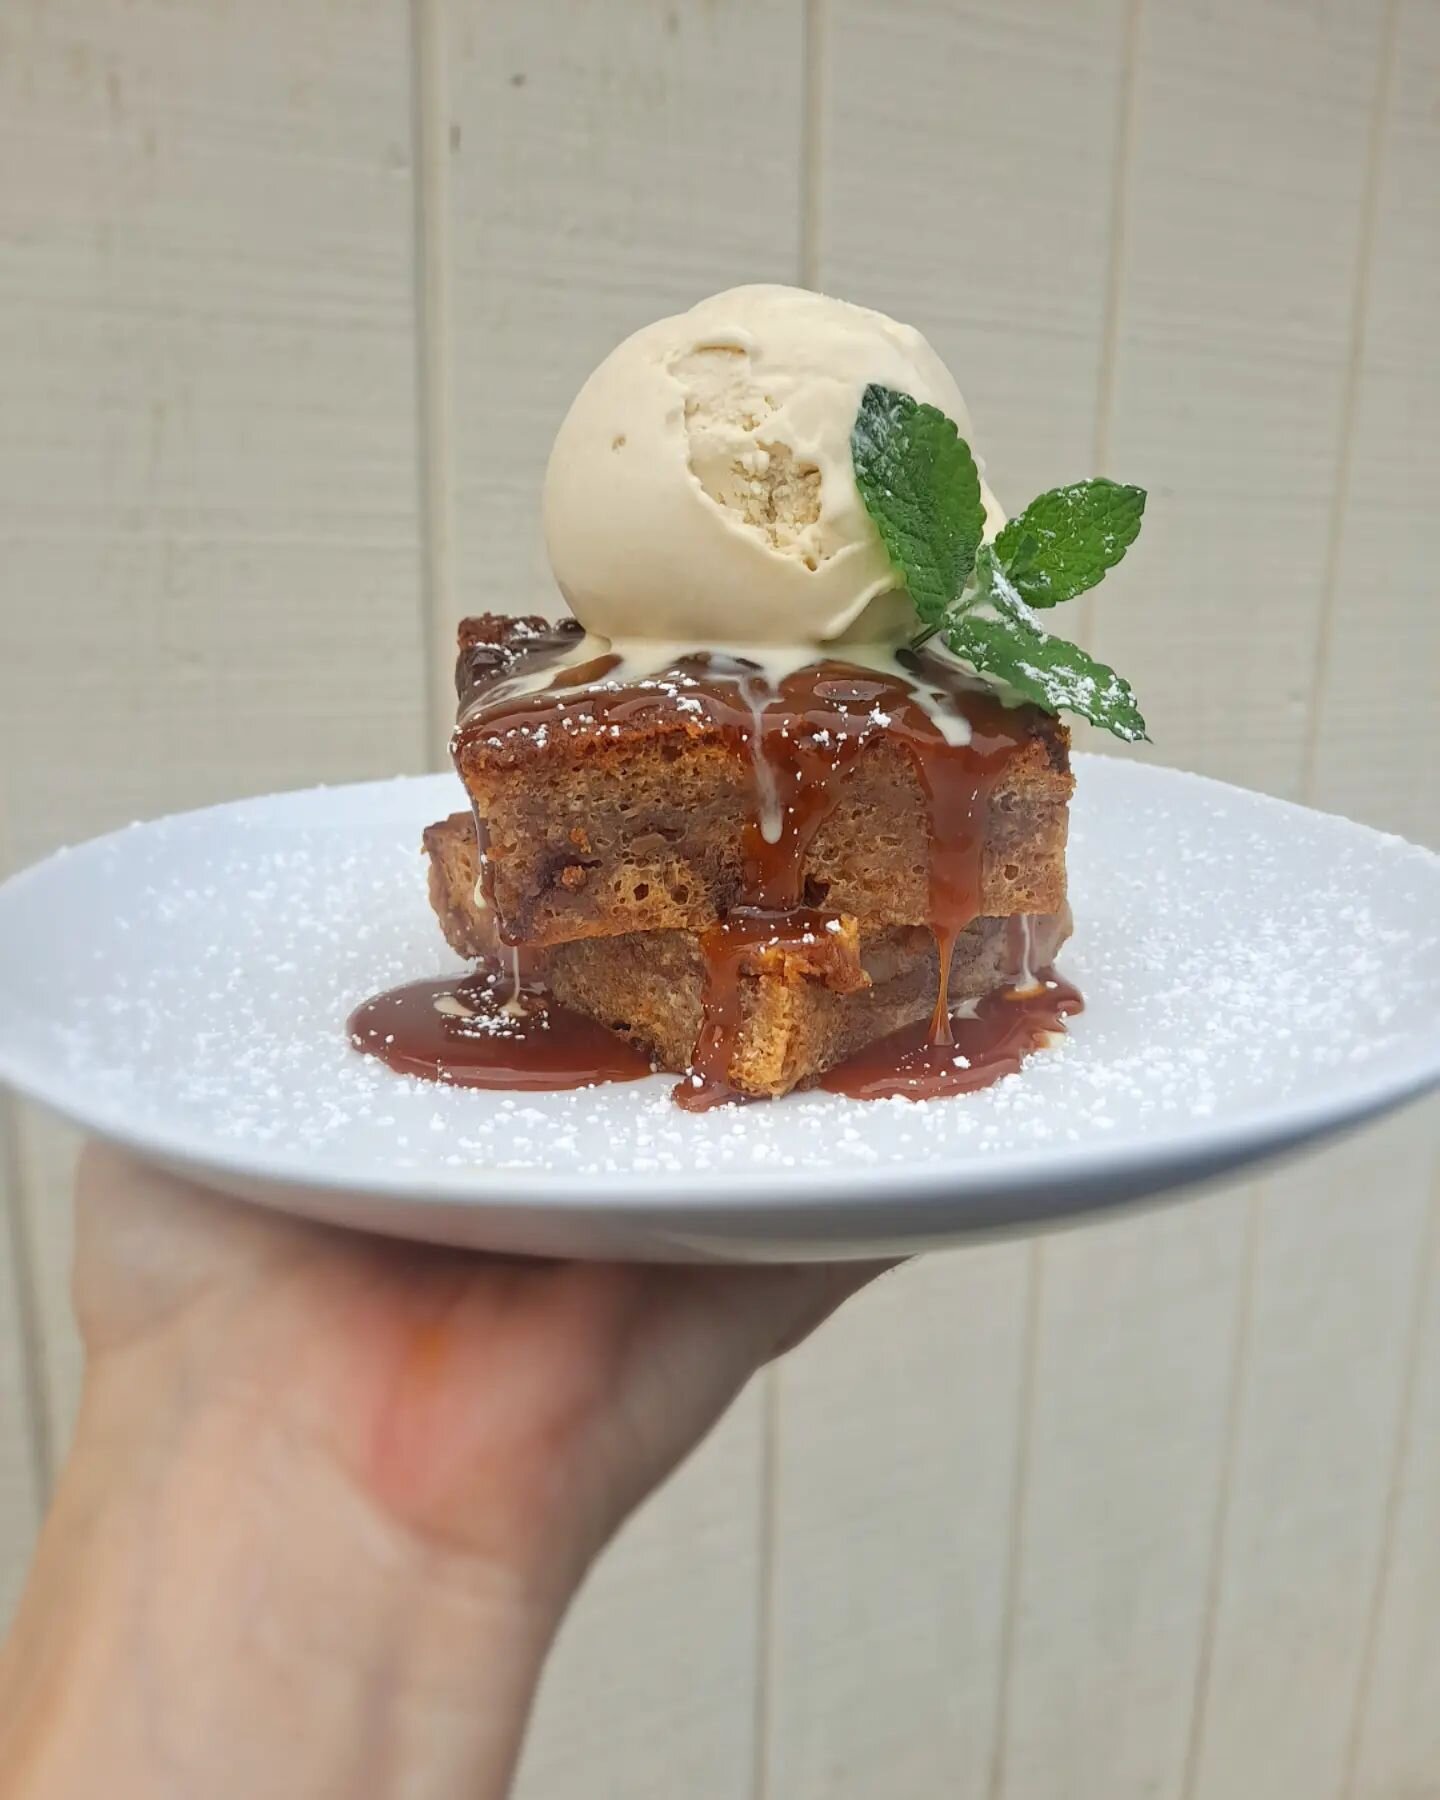 Walnut Sticky Bun Bread Pudding on special this whole dreary week! BP made entirely of our cinnamon buns soaked in a lightly spiced white chocolate custard, served with thick, gooey salted caramel and housemade coffee ice cream. #applestreetkitchen #